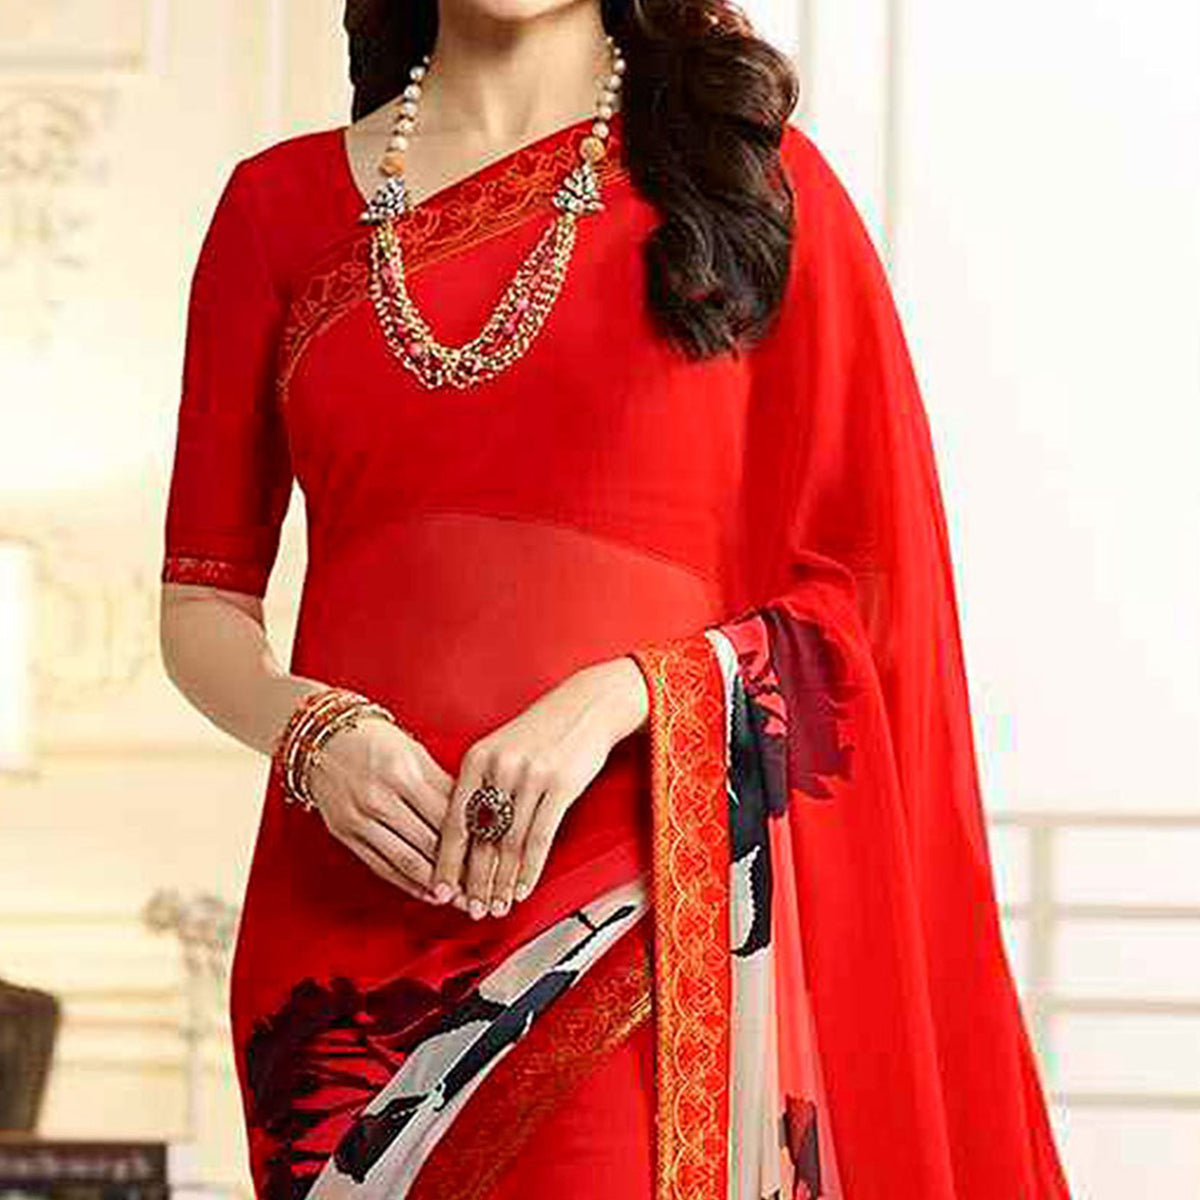 Red Printed Georgette Saree With Lace Border